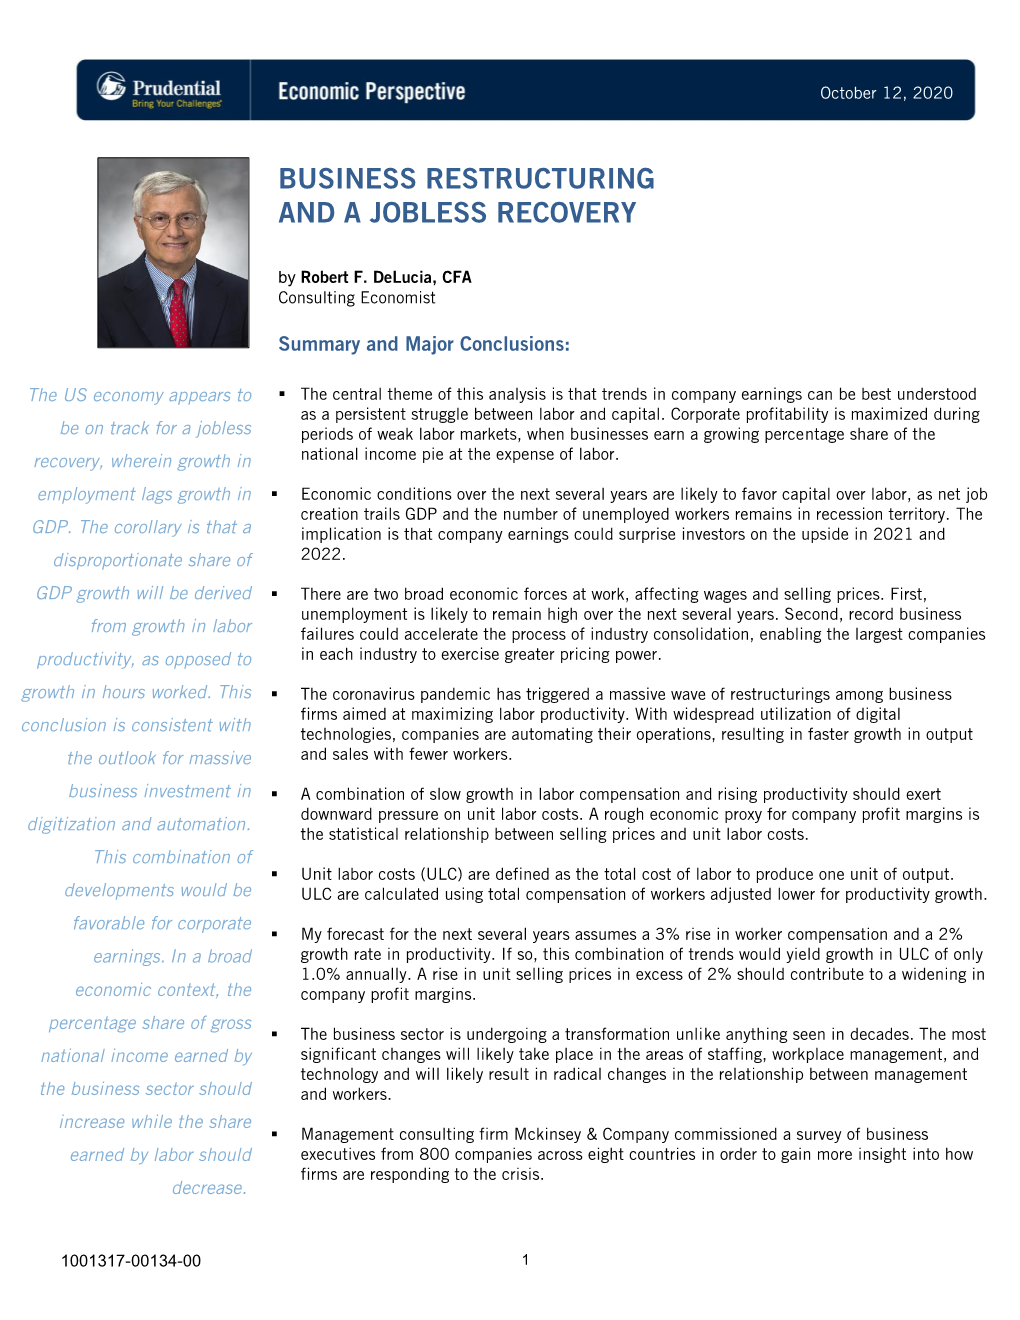 Business Restructuring and a Jobless Recovery